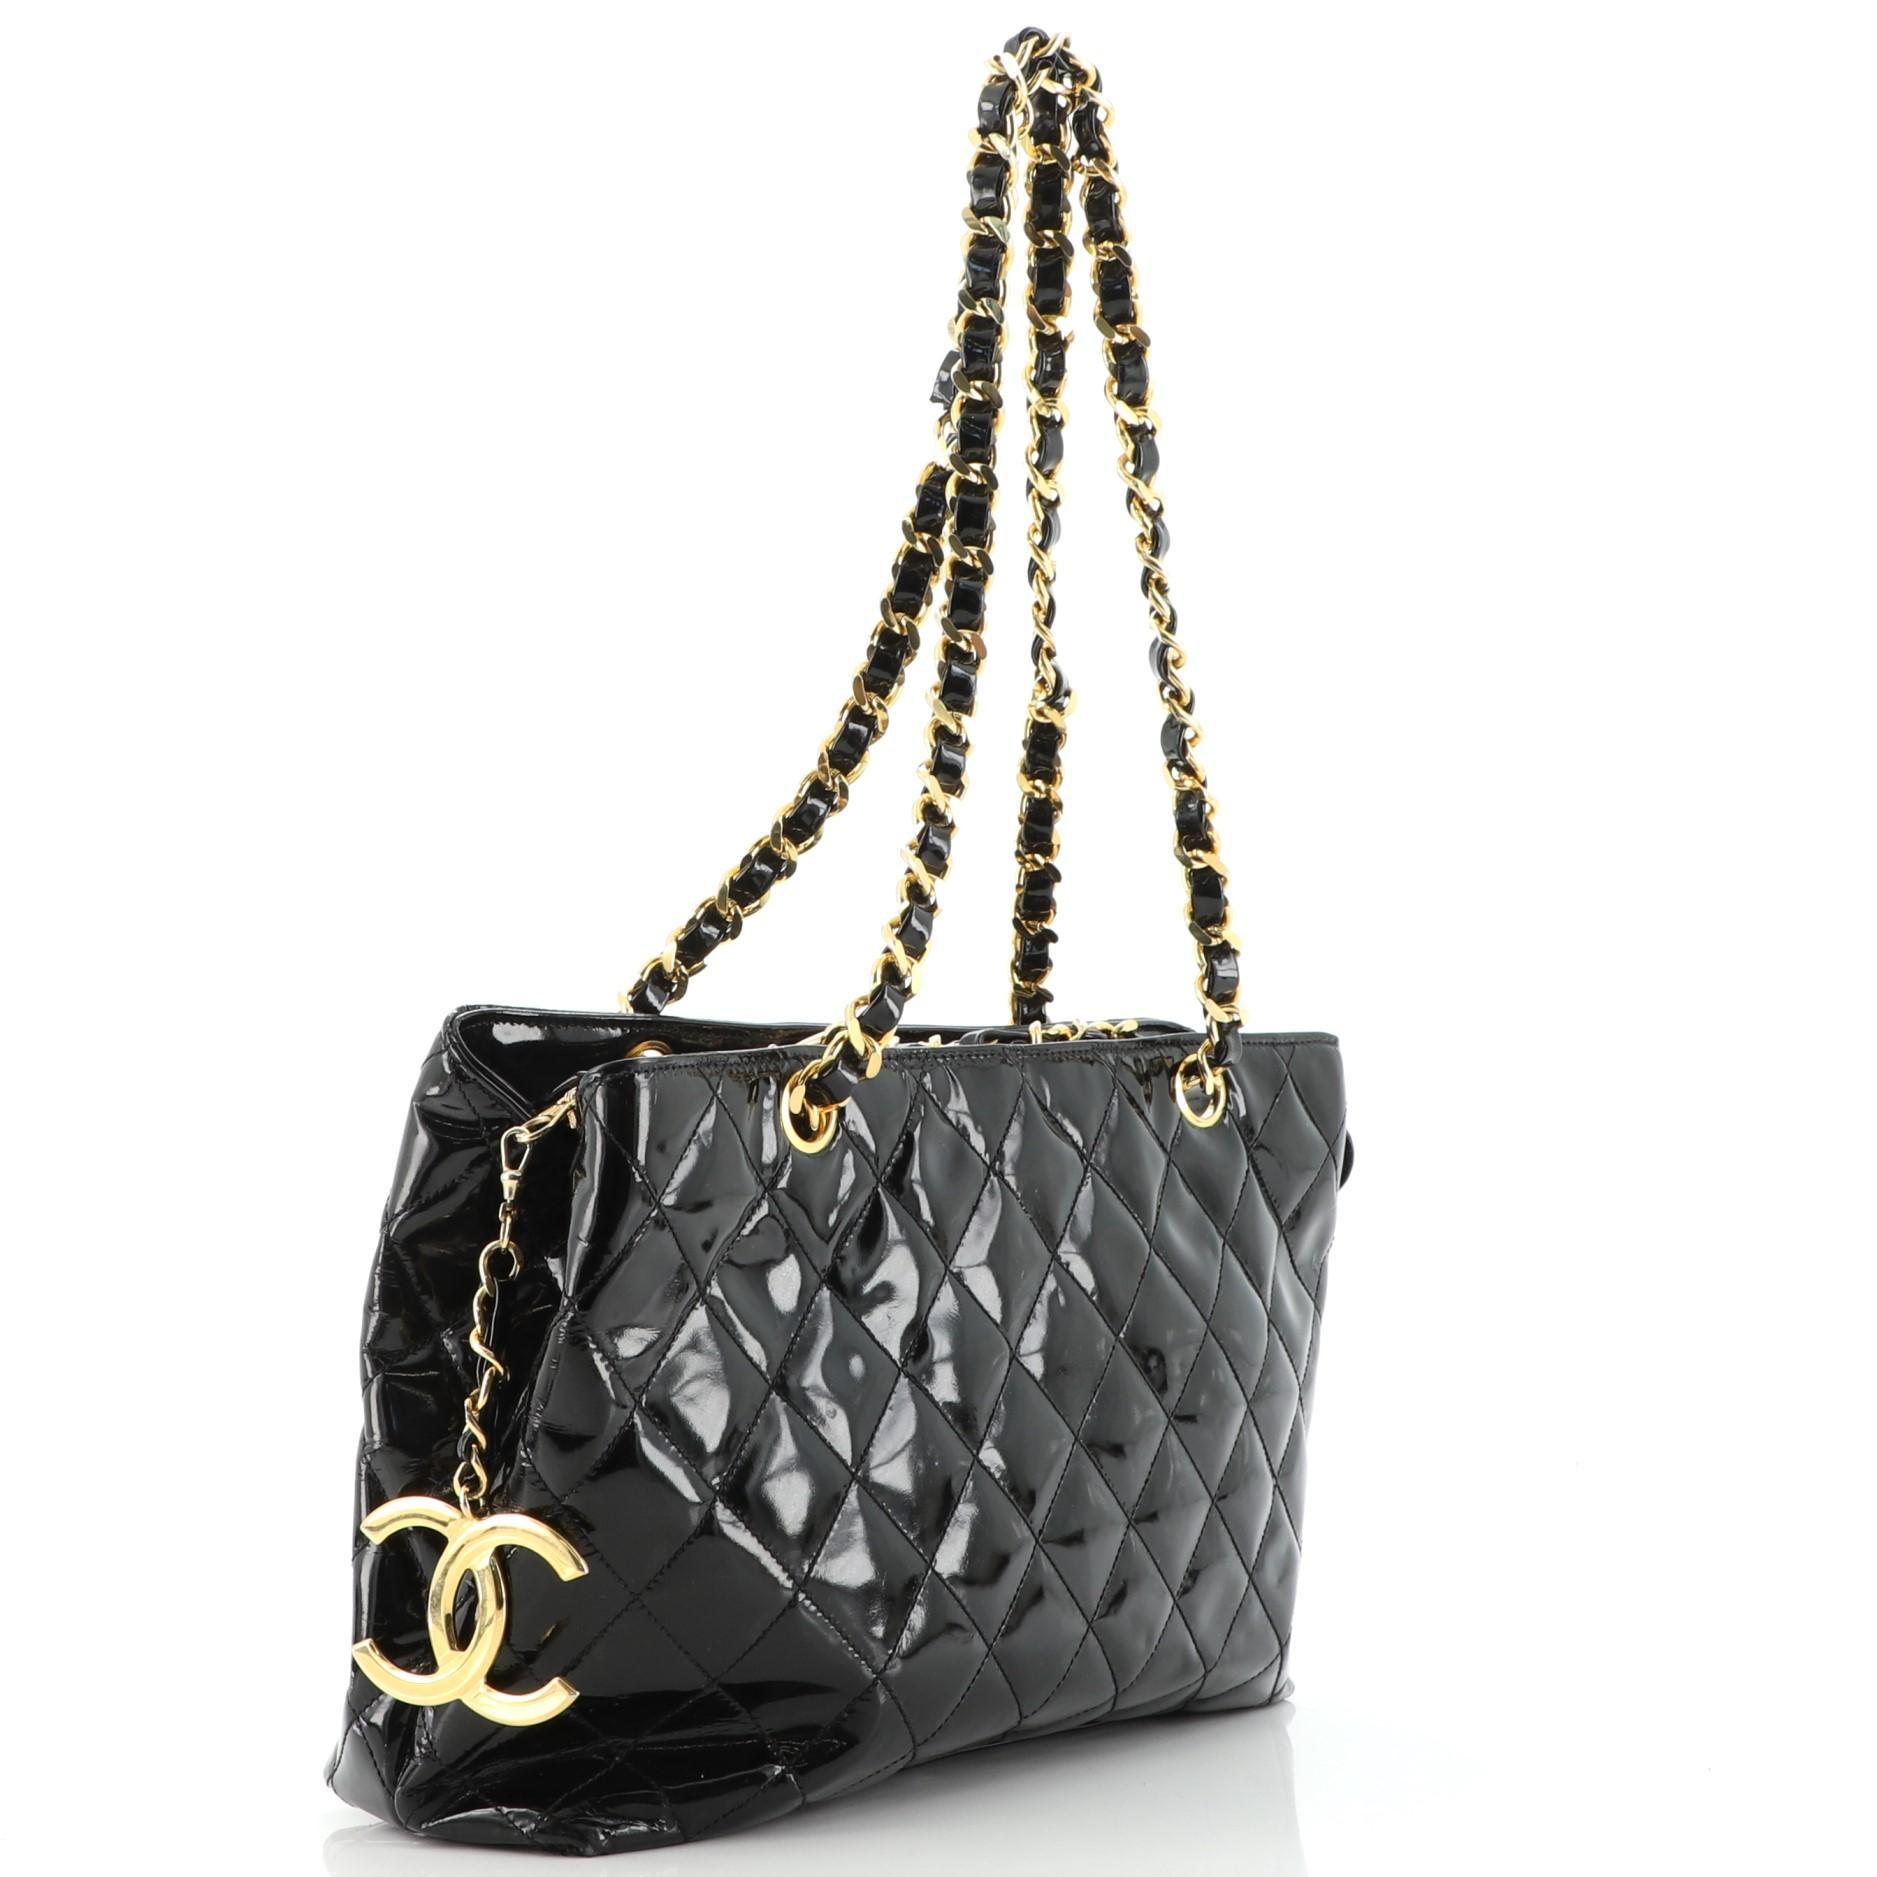 Black Chanel Vintage CC Charm Tote Quilted Patent Medium